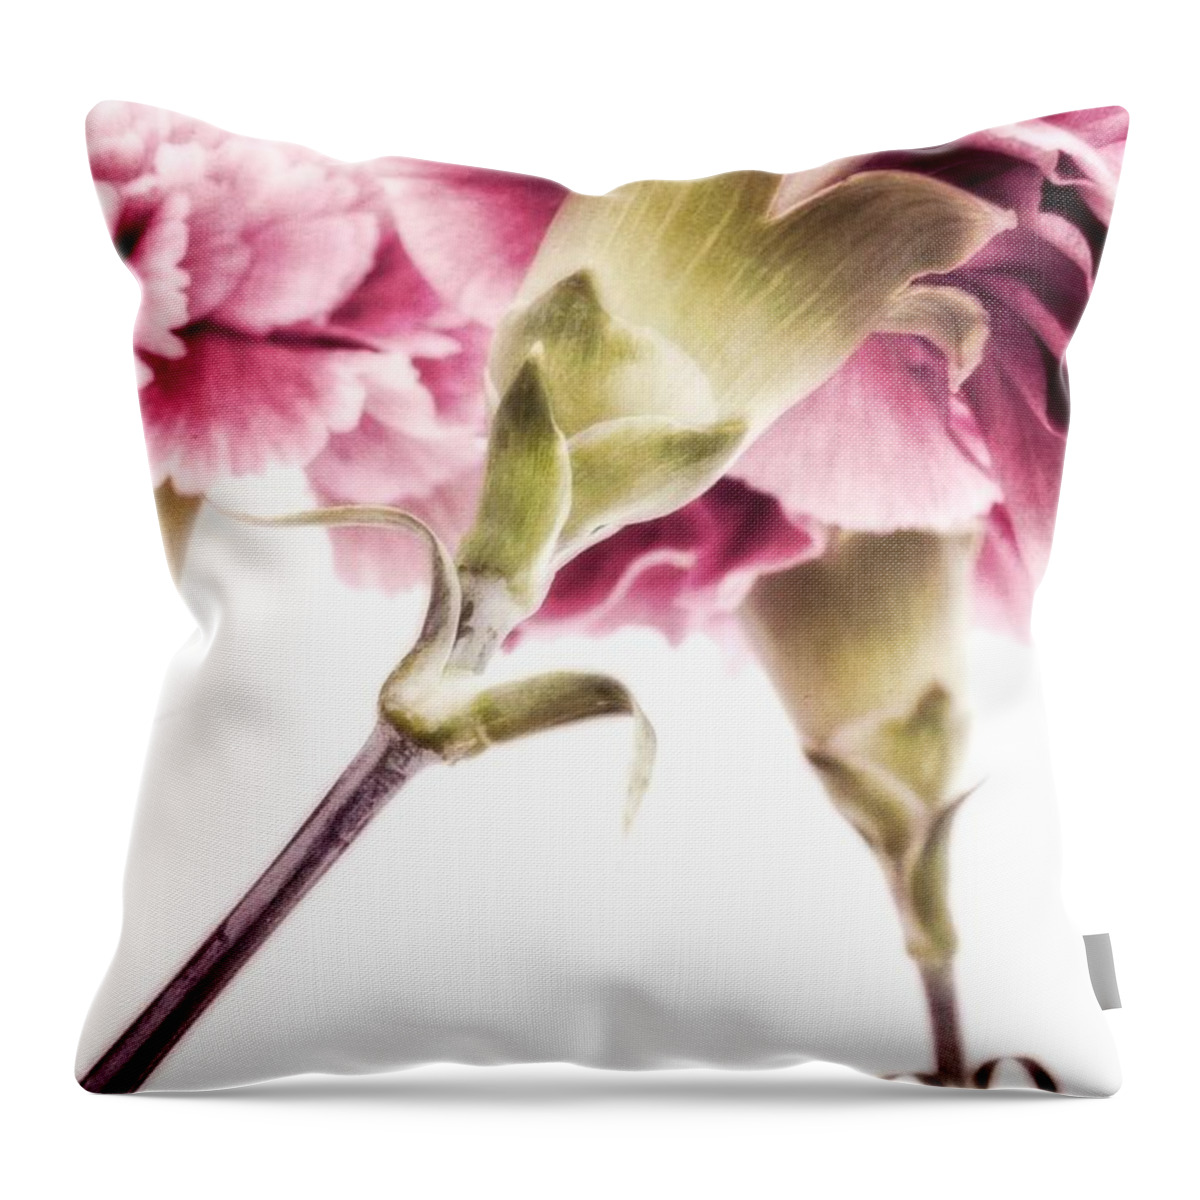 Modern Throw Pillow featuring the photograph Carnations by Priska Wettstein